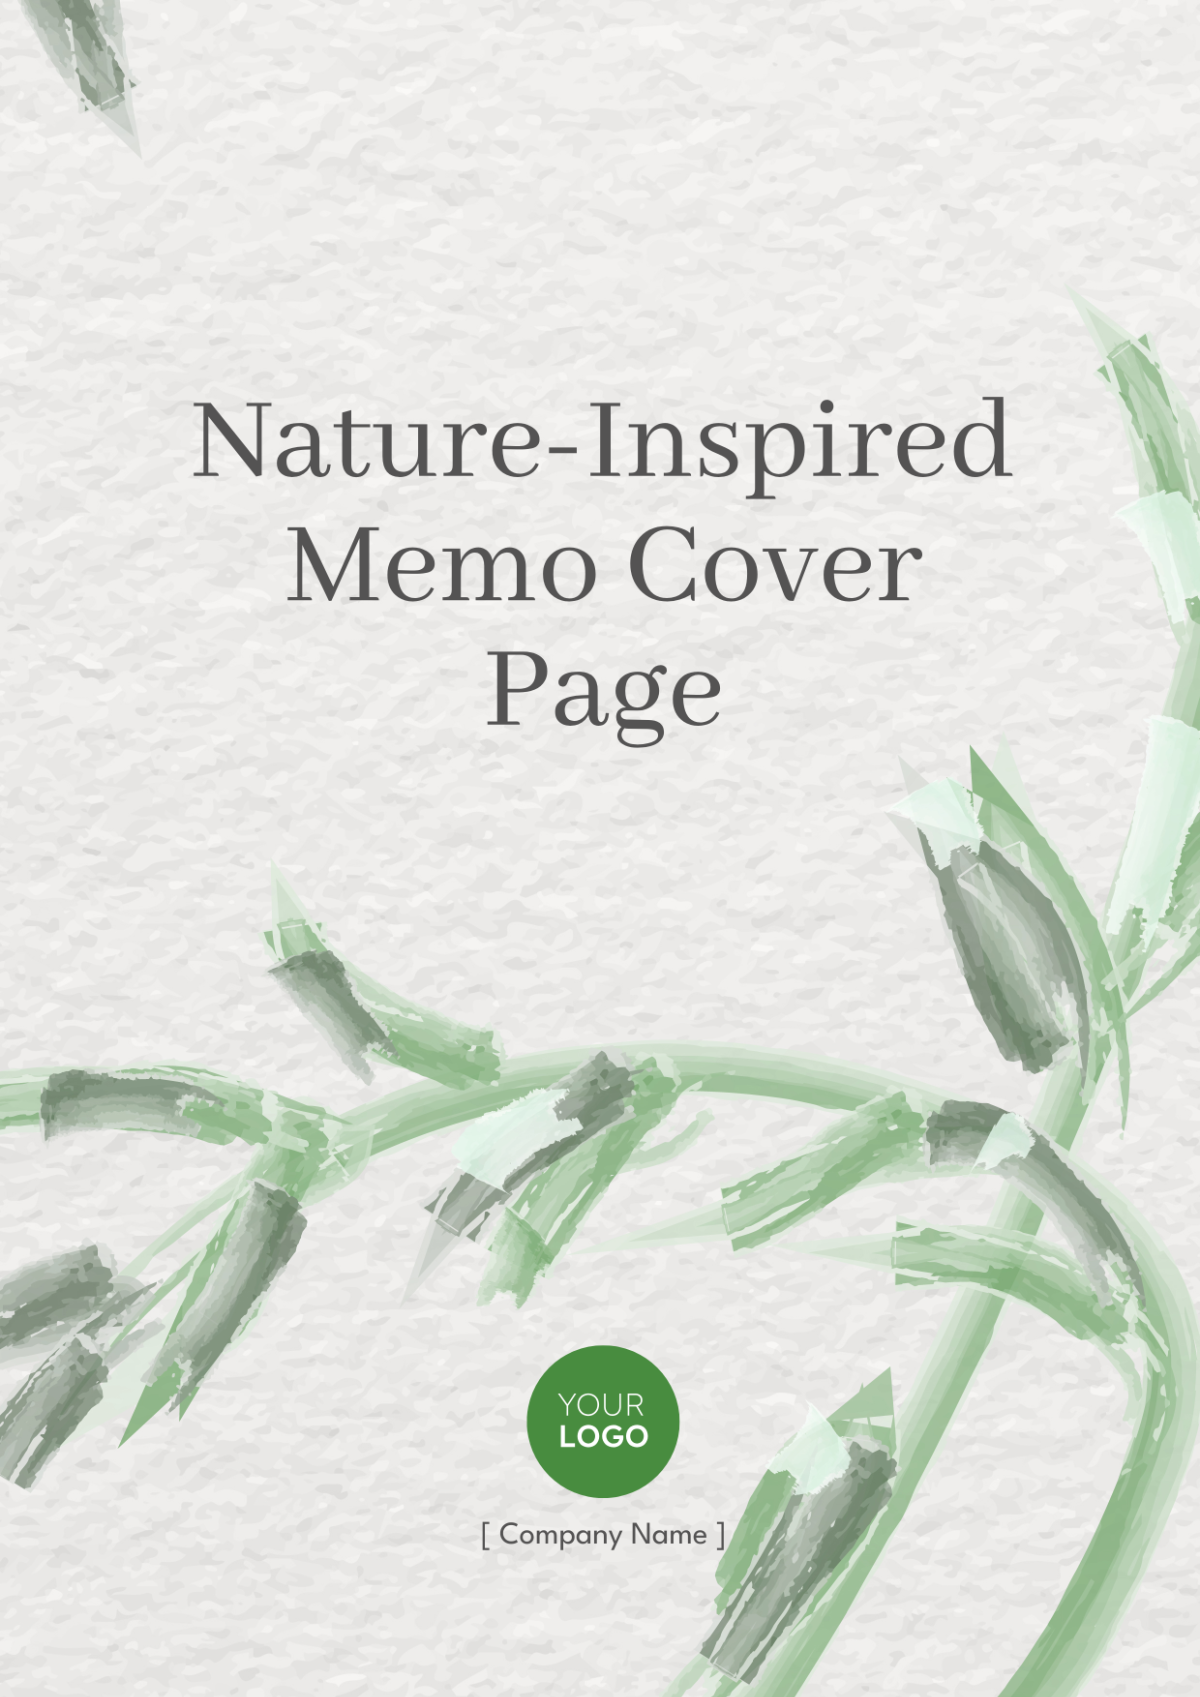 Nature-Inspired Memo Cover Page Template